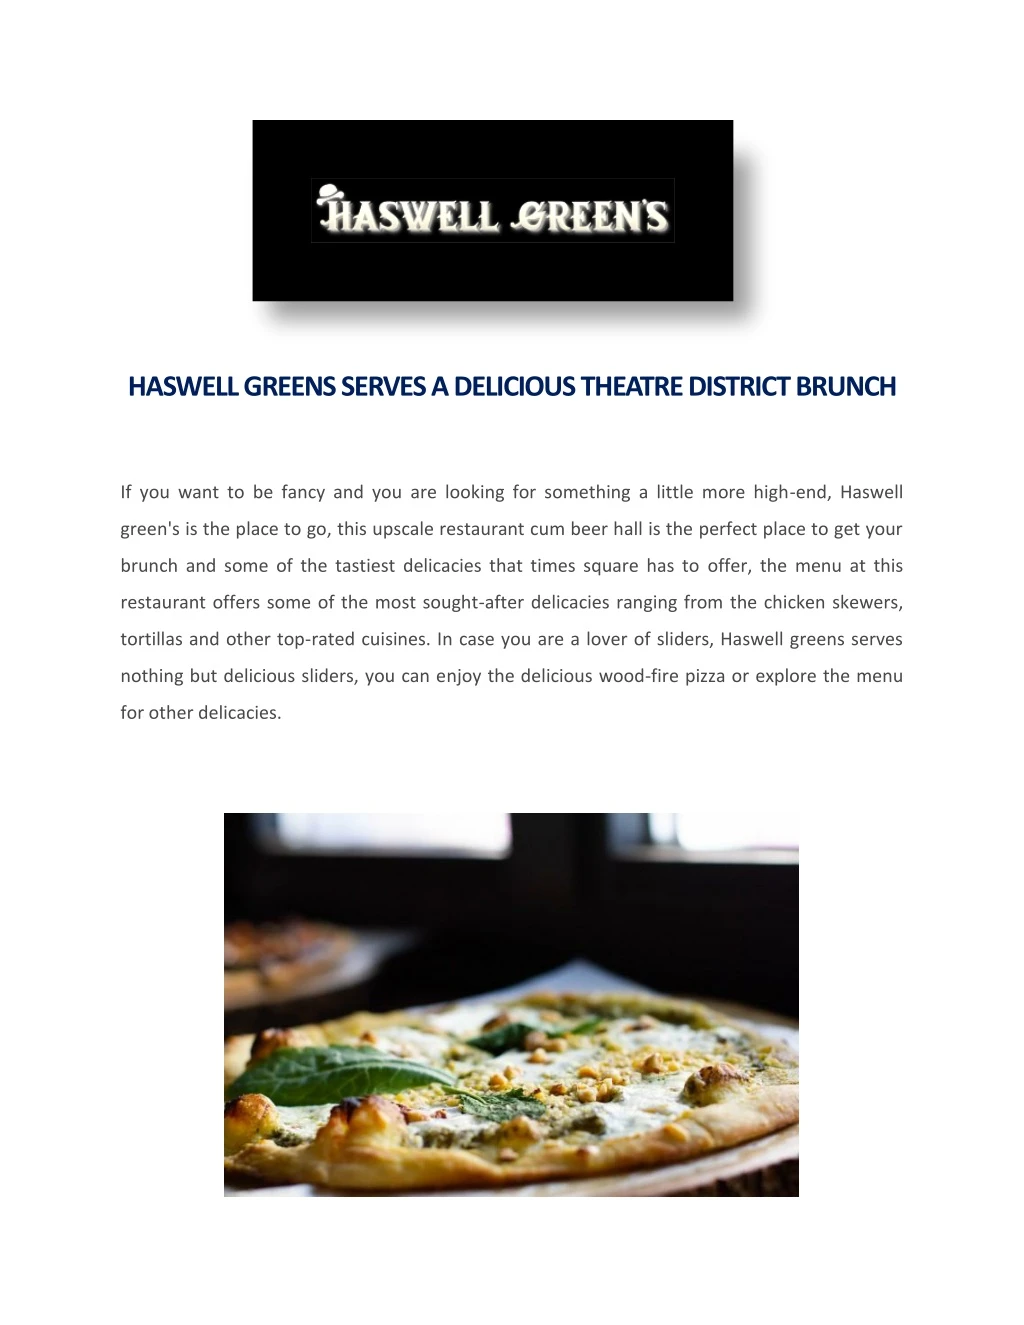 haswell greens serves a delicious theatre